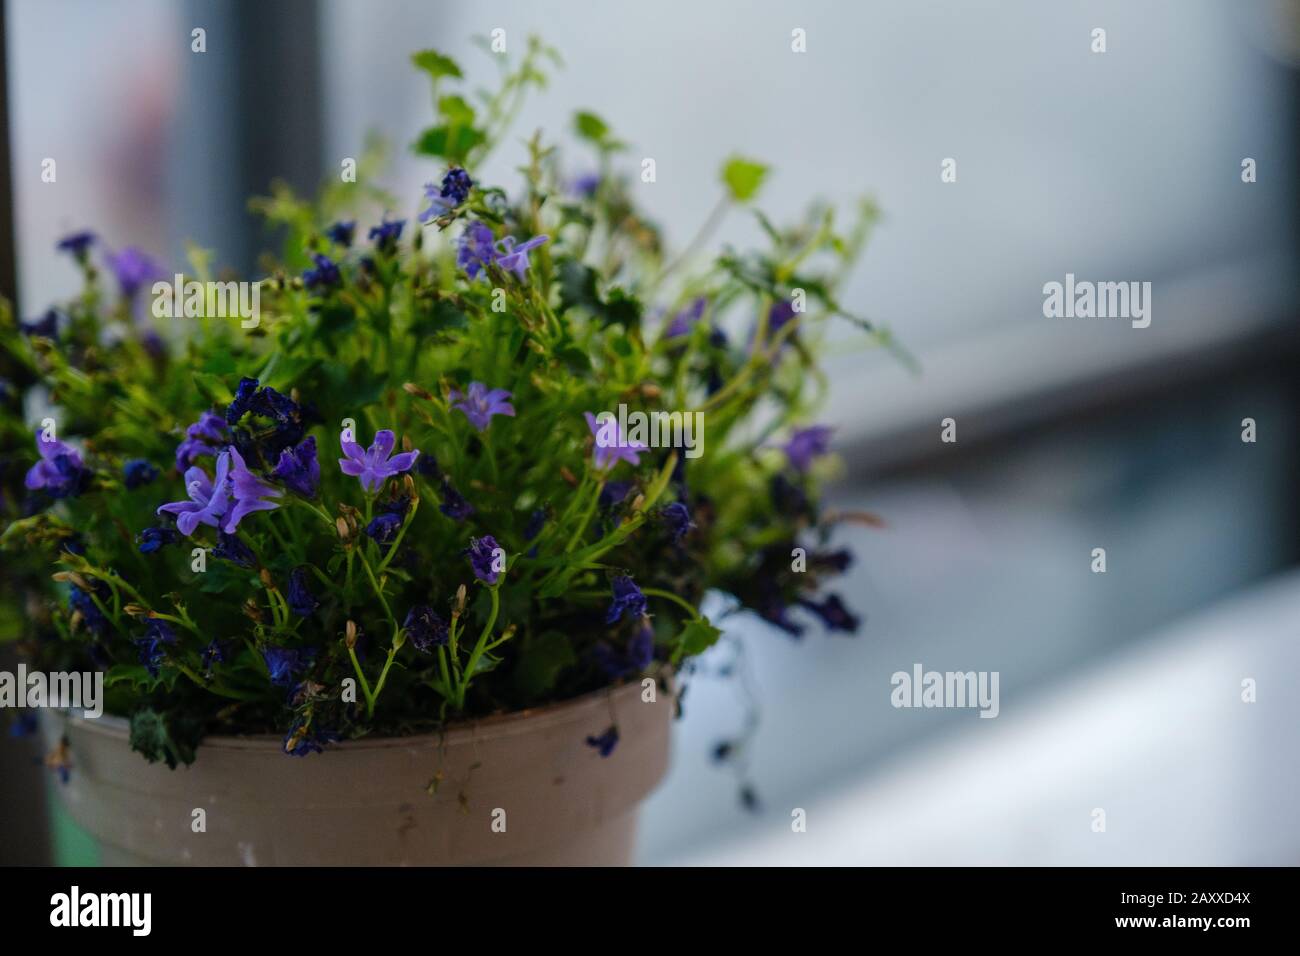 Campanula isophylla, Violet bellflowers in a pot on a table near window. Stock Photo